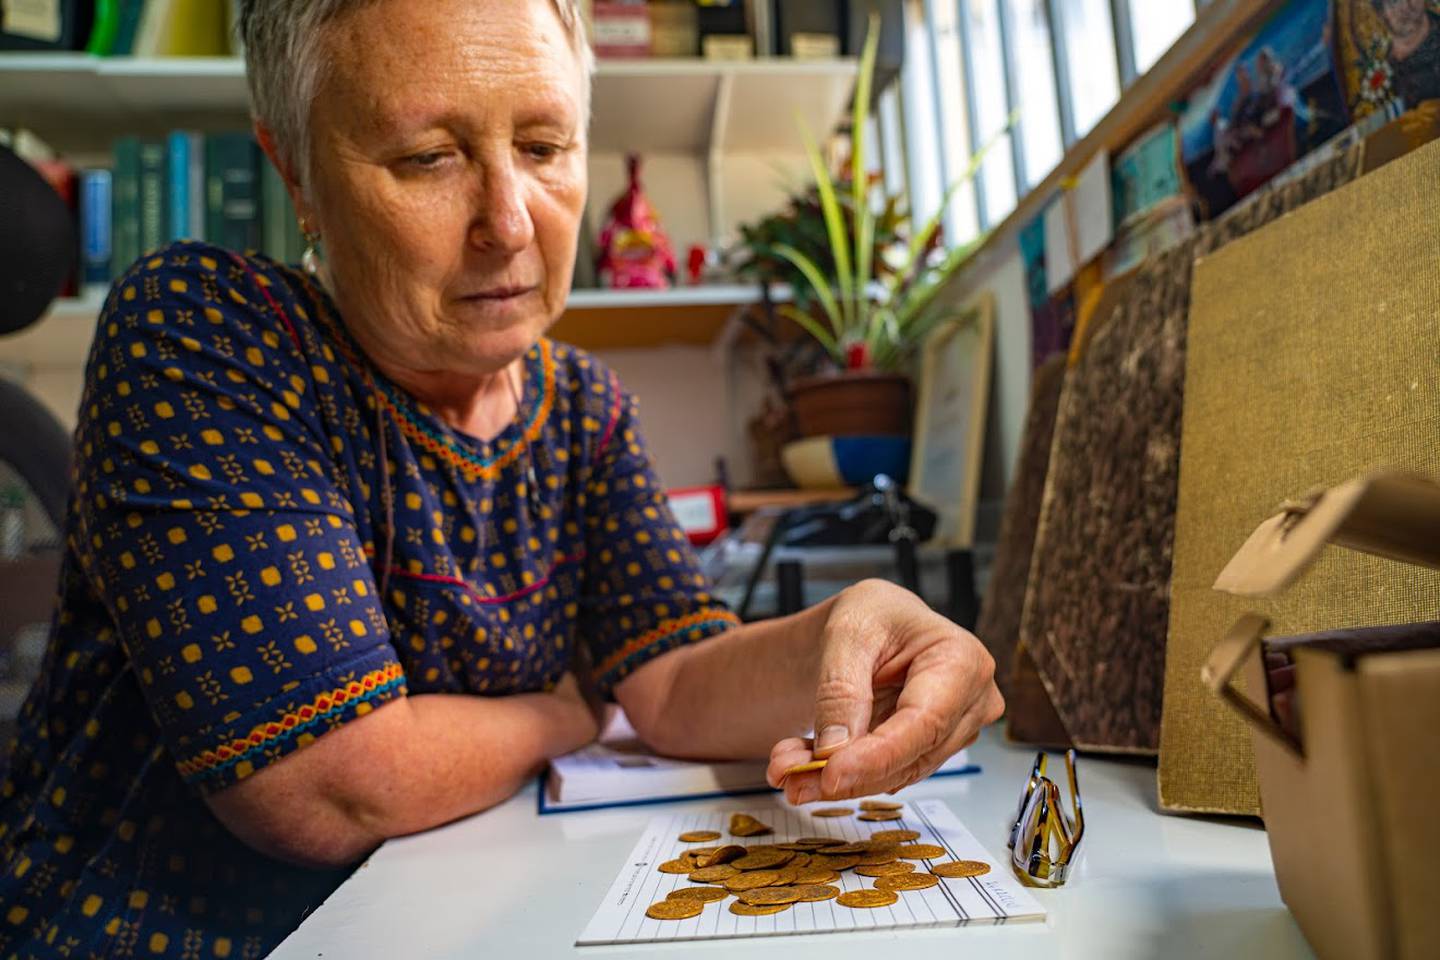 Gabriela Bijovsky, a currency expert at the Israel Antiquities Authority, examines the coins from Banias. Photo: Israel Antiquities Authority